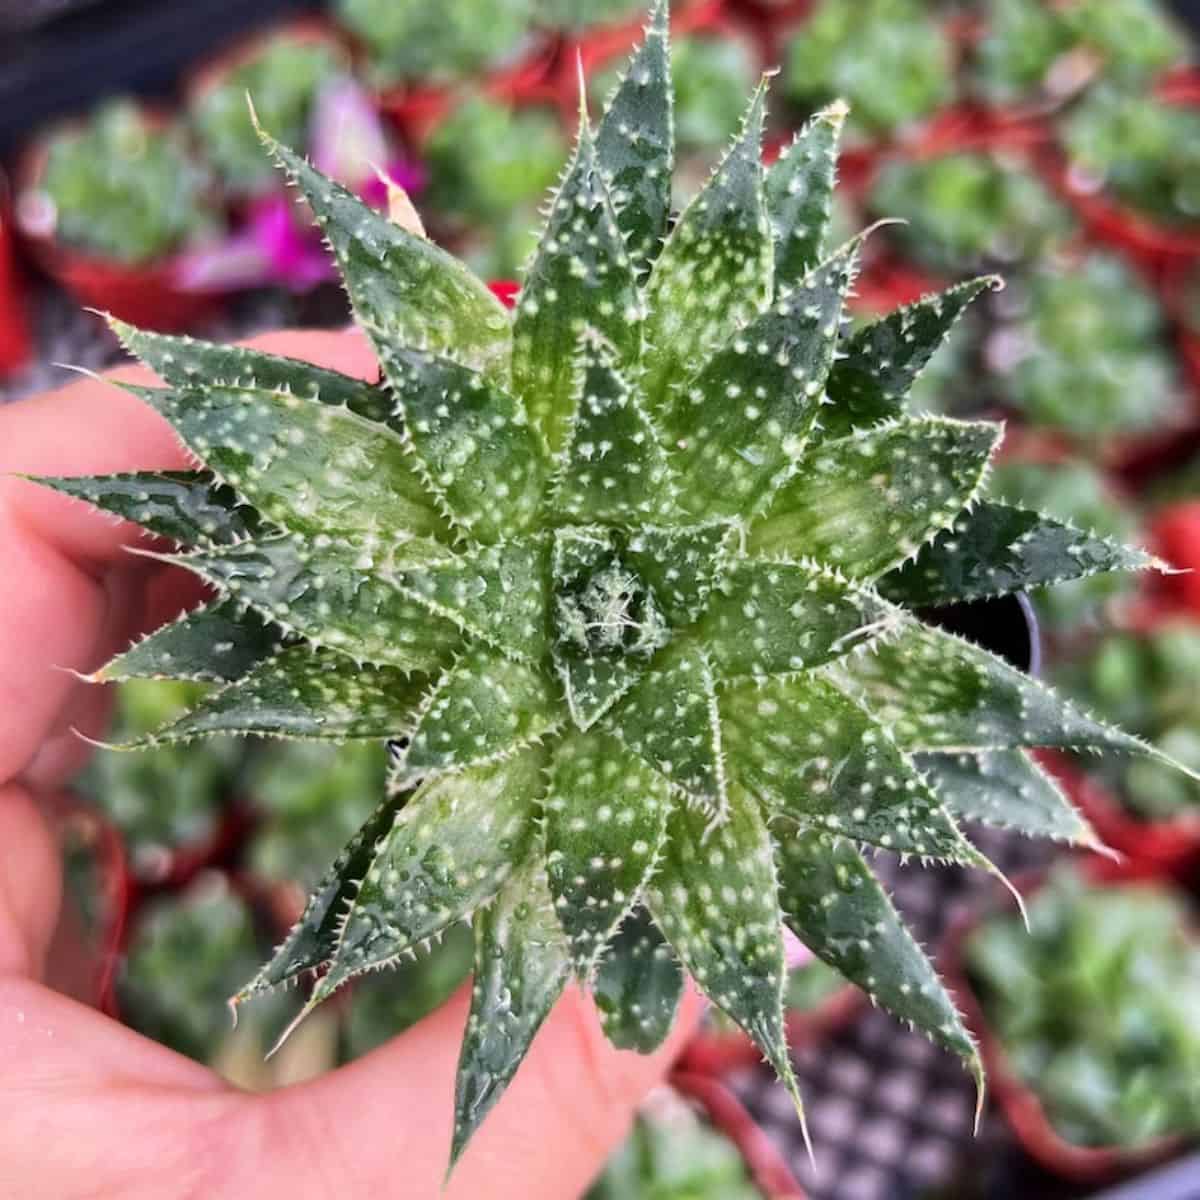 Aloe aristata with speckled foliage held by hand.